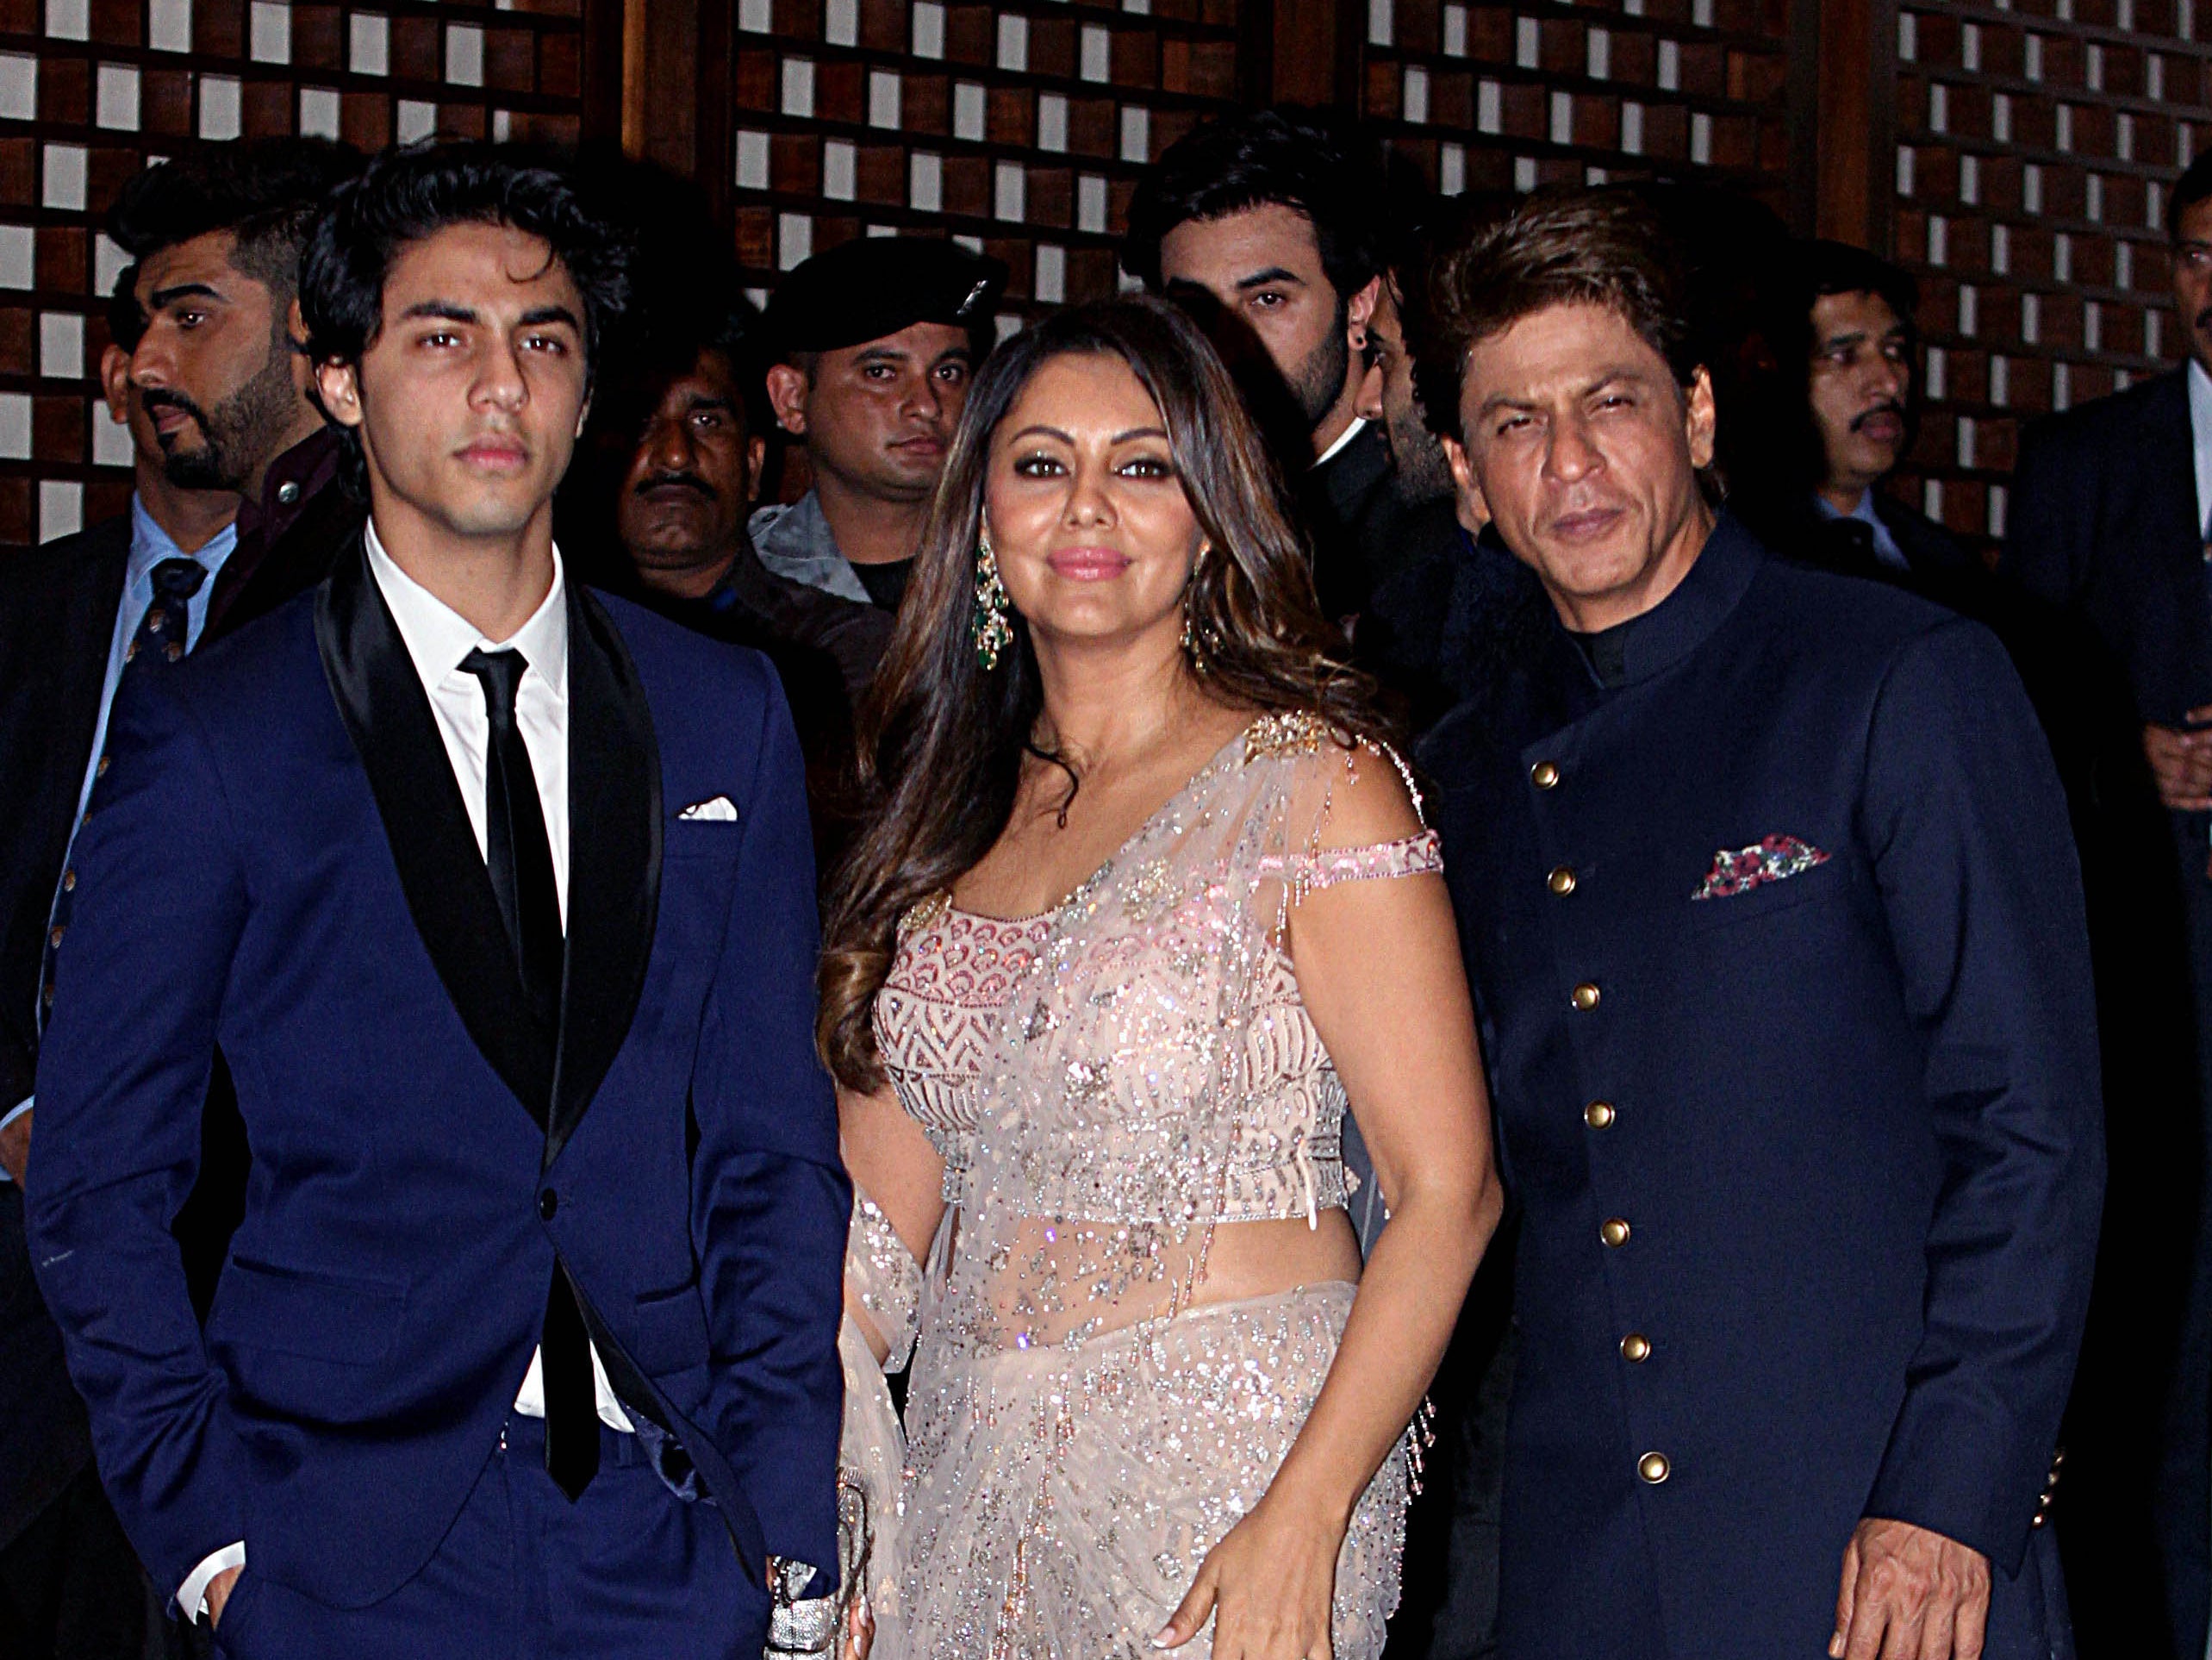 Shah Rukh Khan (right) poses for a picture with wife Gauri Khan and son Aryan Khan